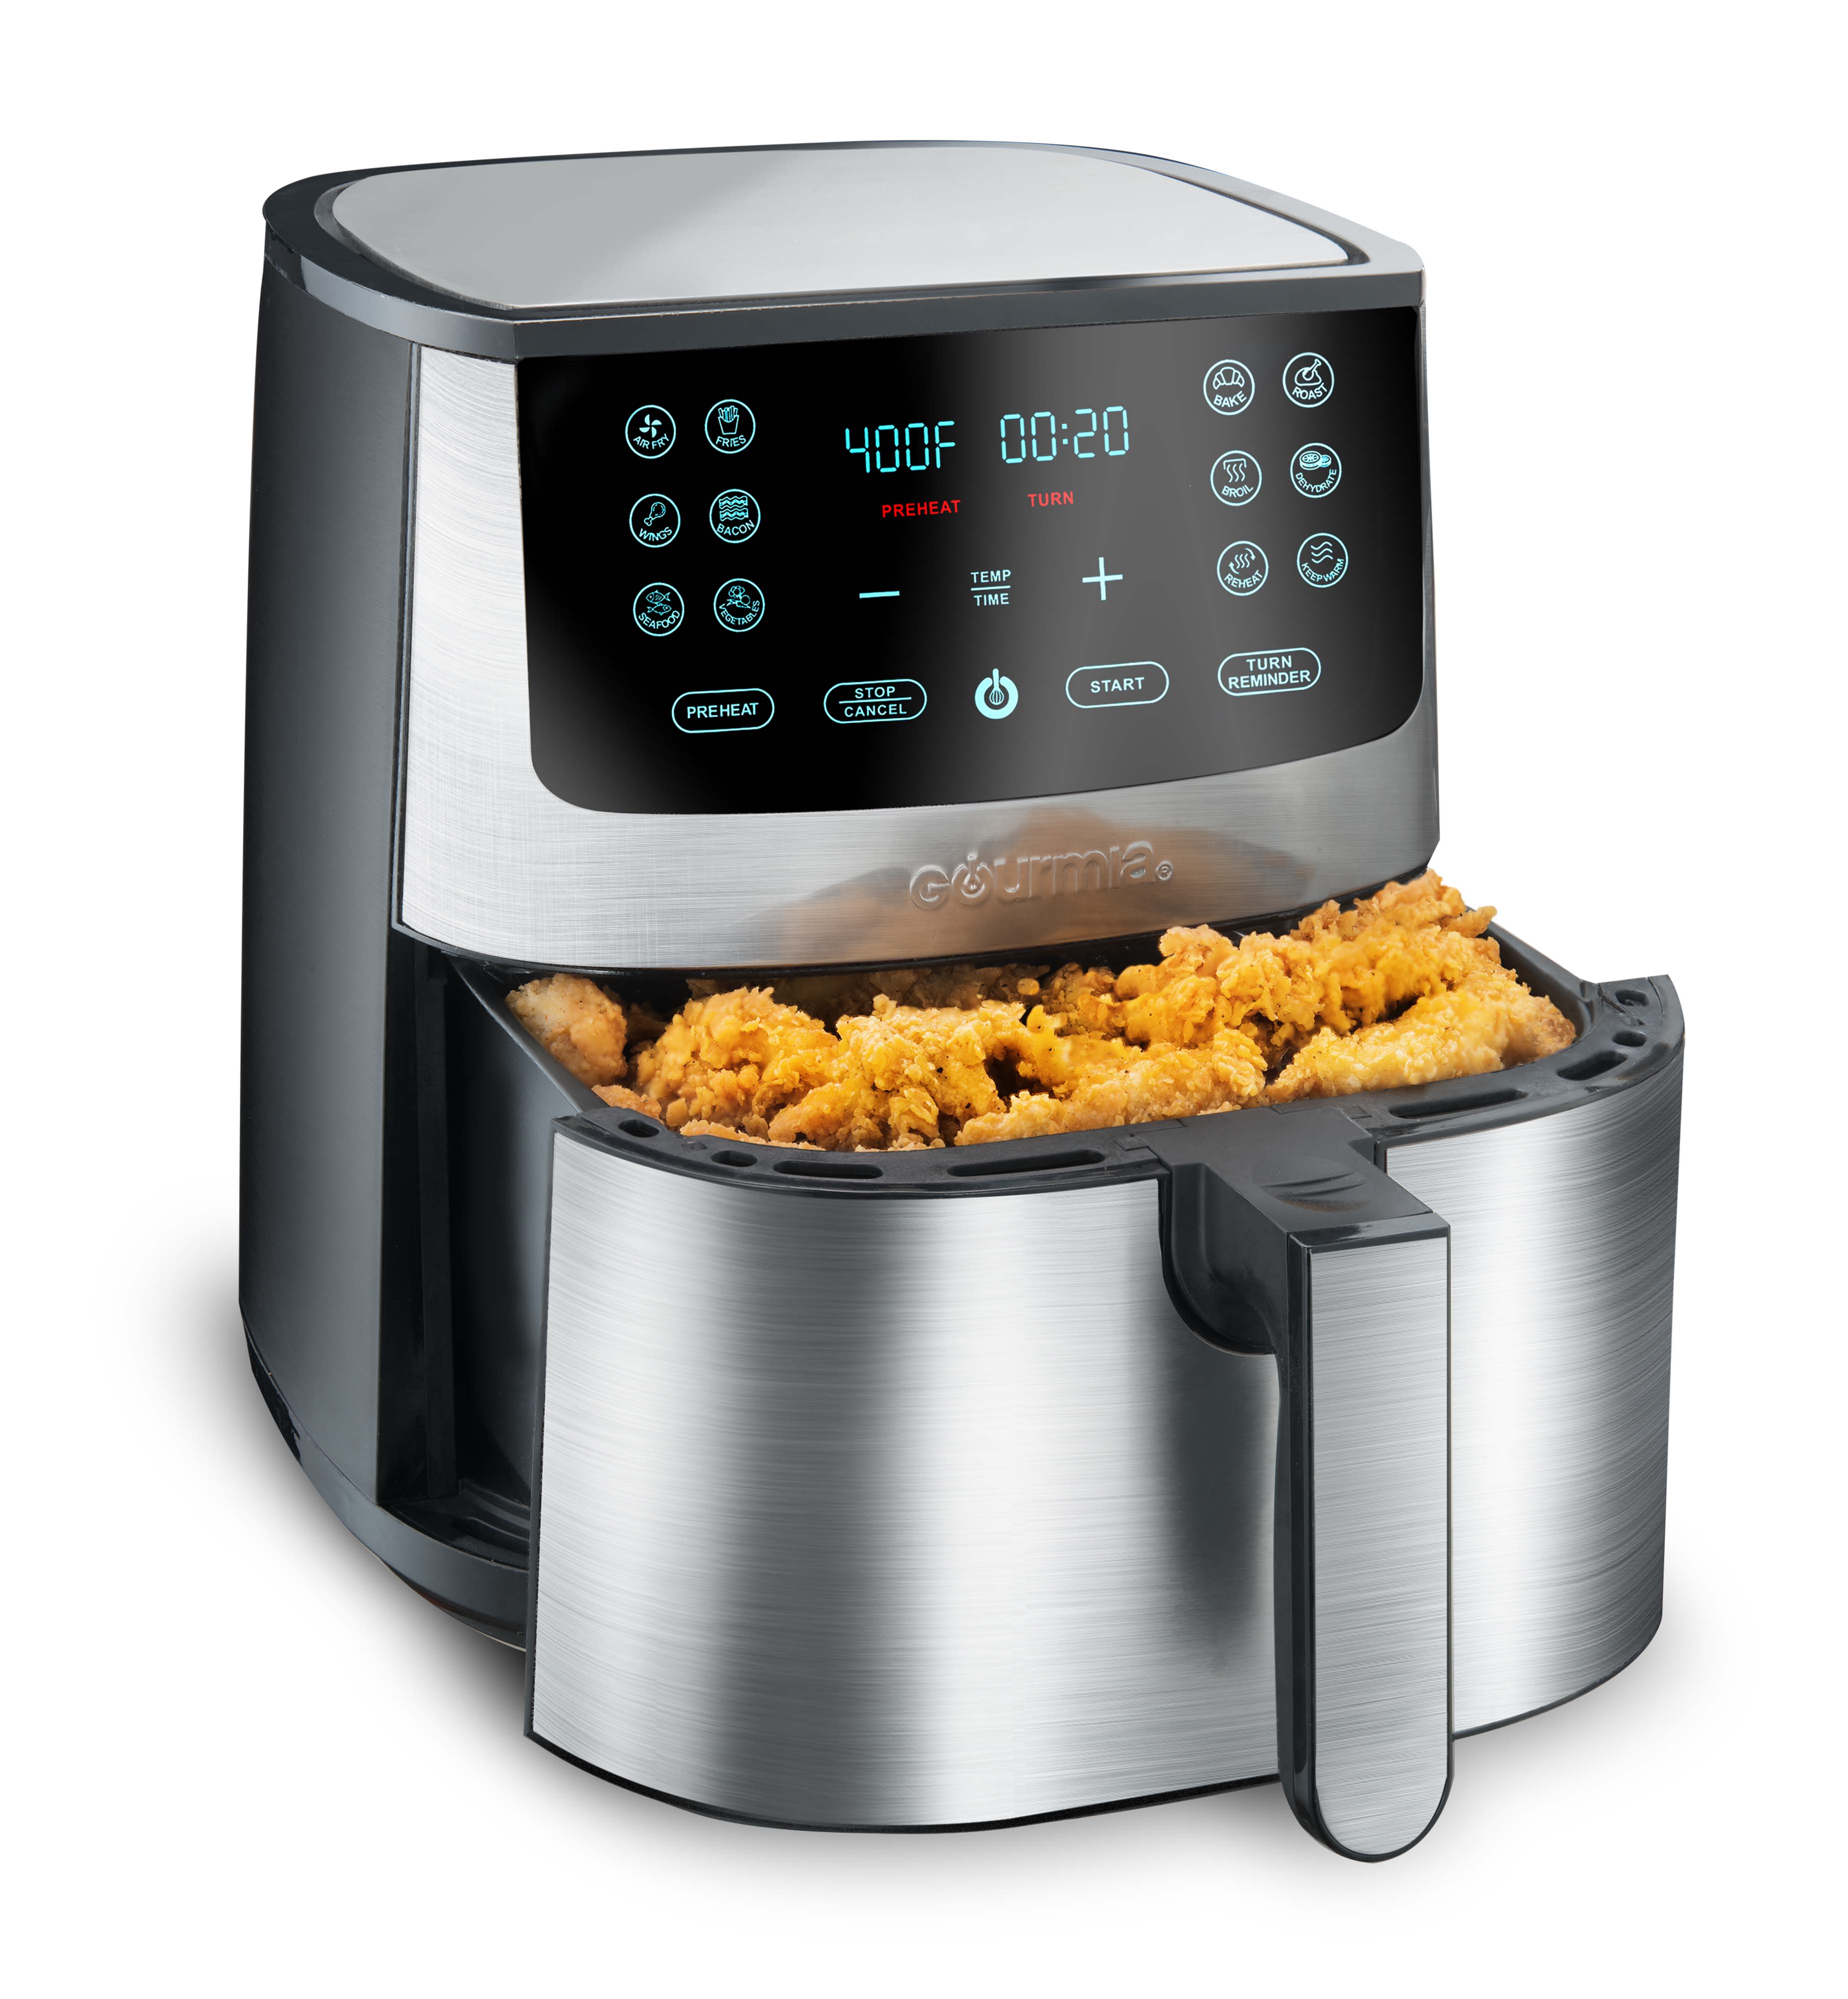 Gourmia 8-Qt Digital Air Fryer with Guided Cooking, Stainless Steel, 13.5 High, New - image 3 of 6